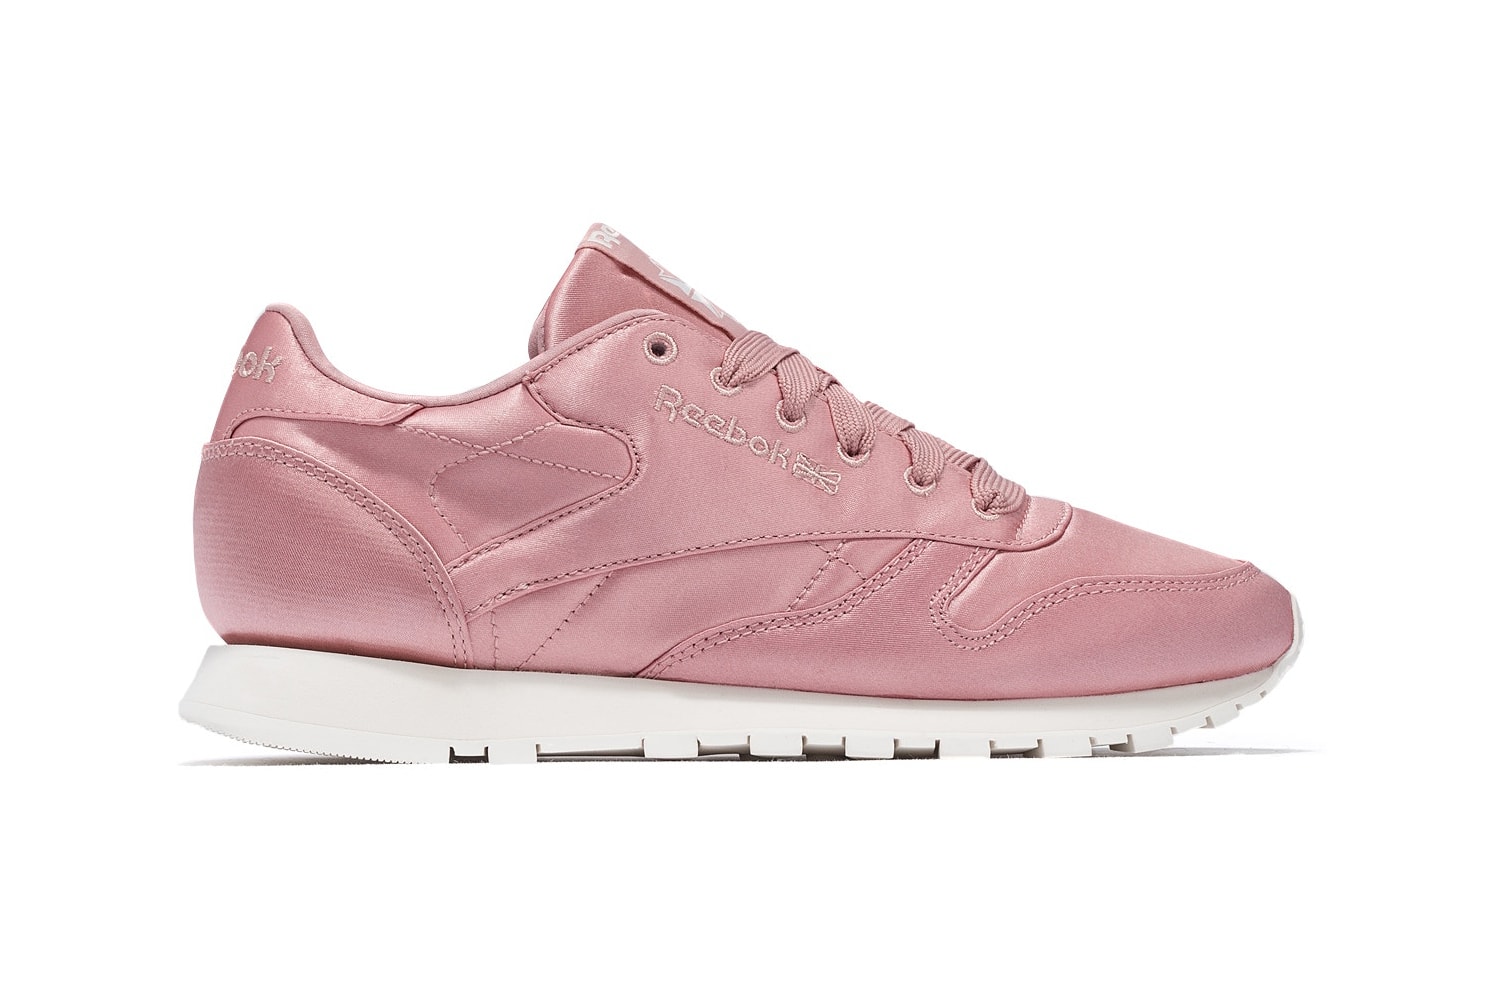 Reebok Millennial Pastel Pink Satin Classic Leather CL Sneakers Trainers Silk Shoes Women's Ladies Girls Where to Buy HBX